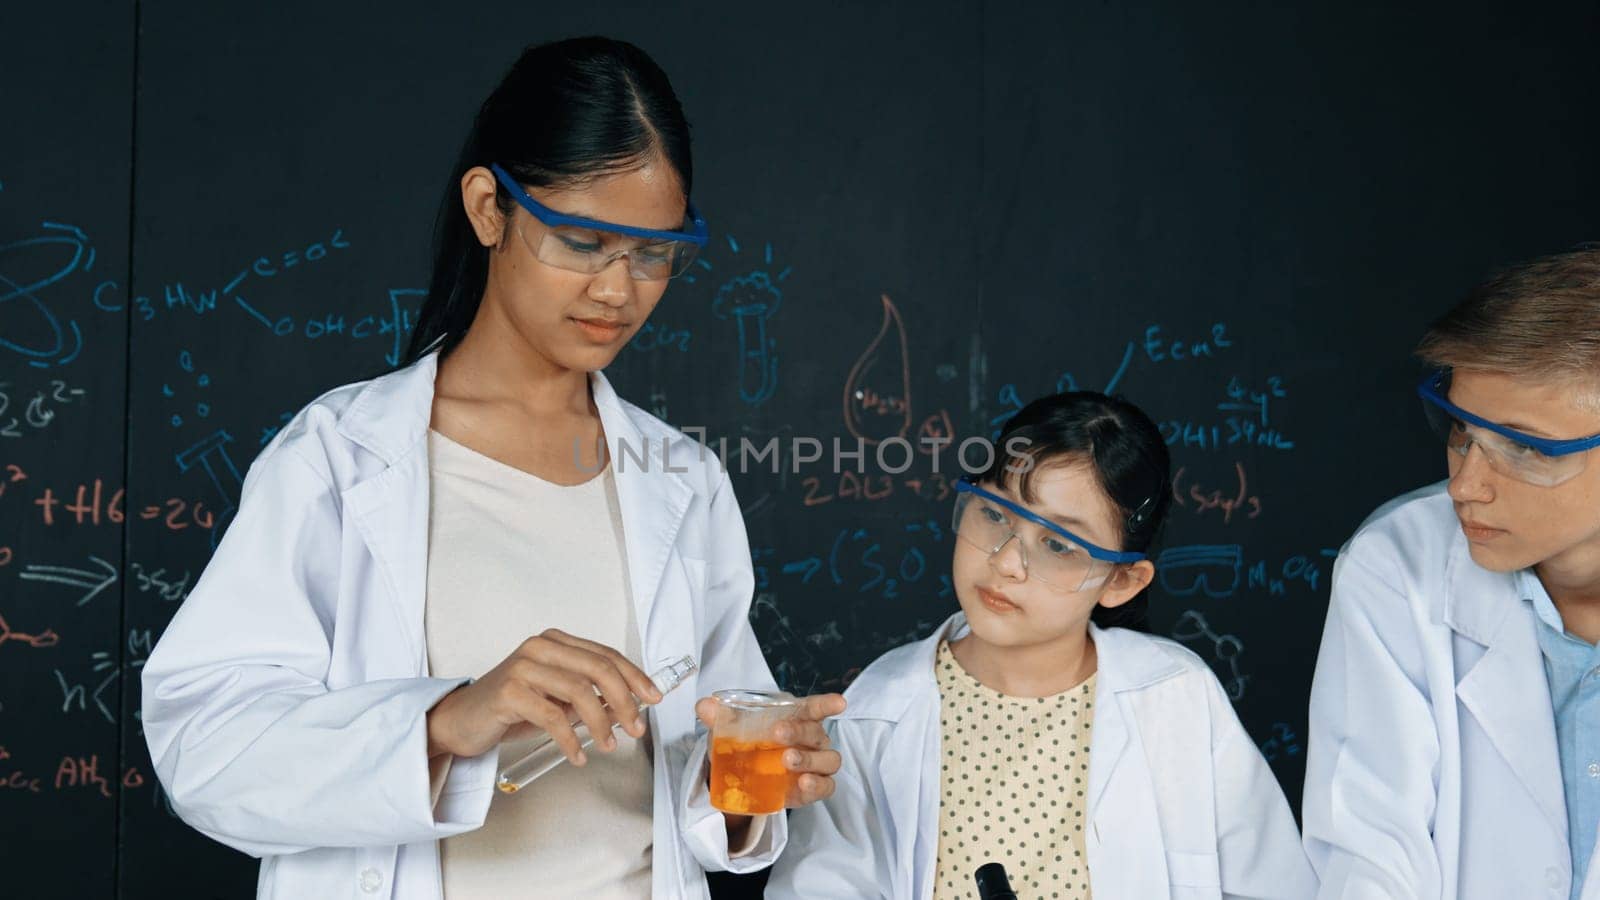 Smart girl pour colored solution in to beaker while diverse student excited about doing experiment. Professional scientist prepare for doing experiment at blackboard with chemical theory. Edification.